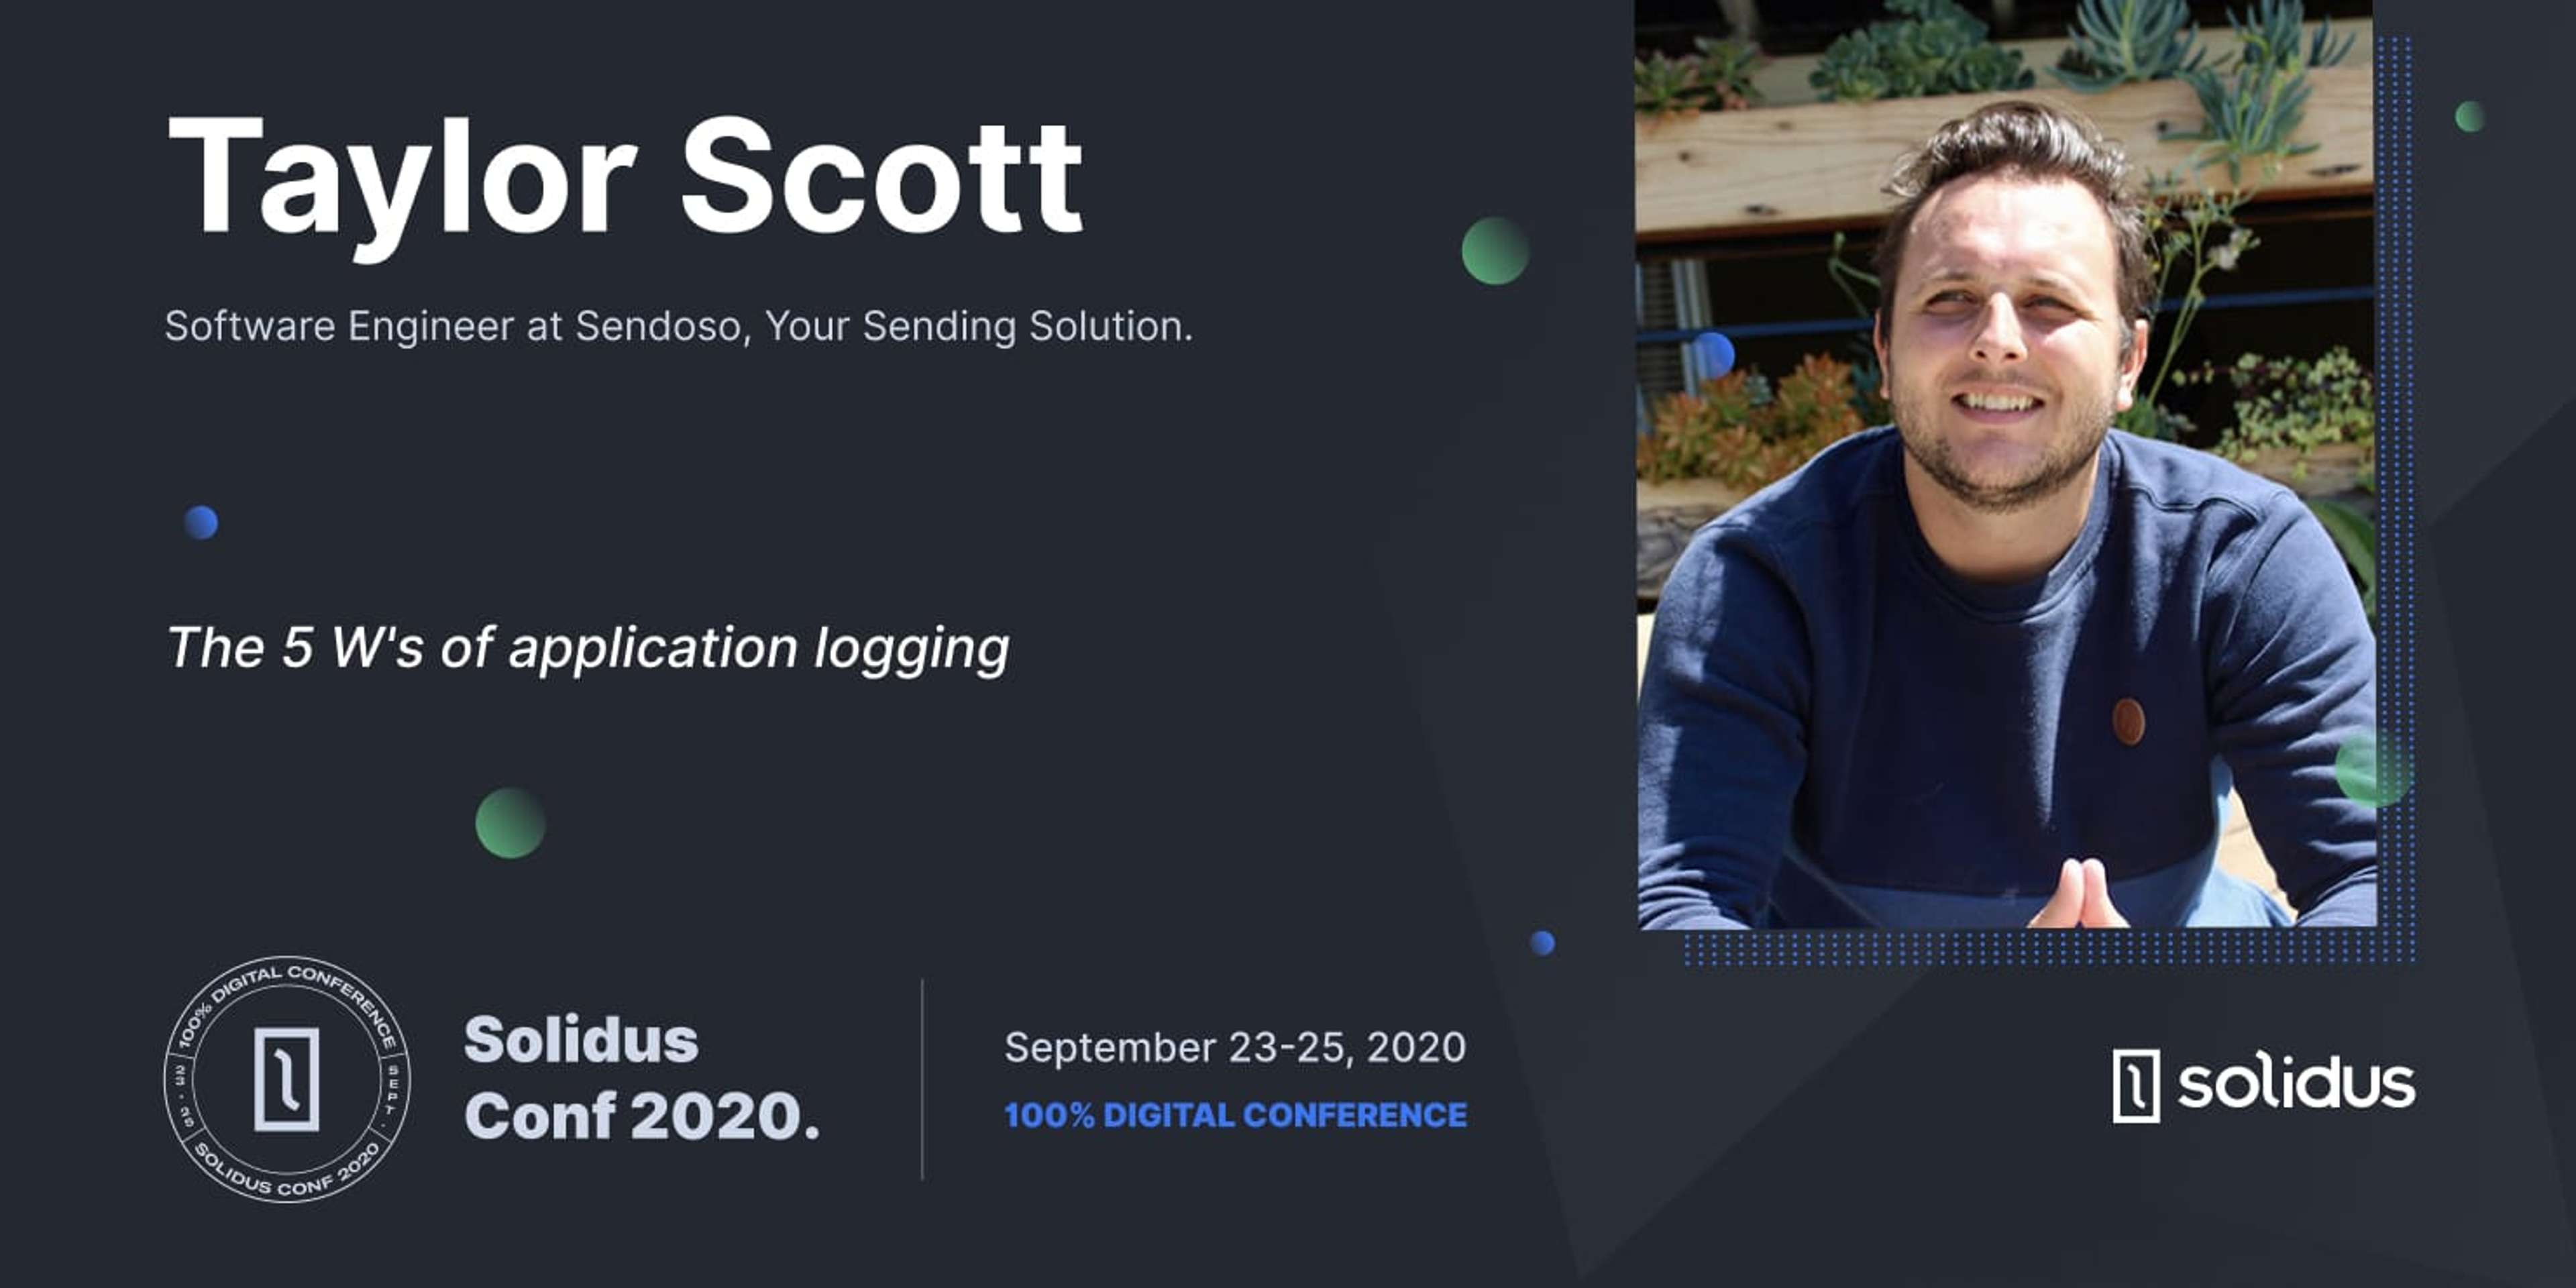 Cover image of SolidusConf 2020 Presenter Taylor Scott post